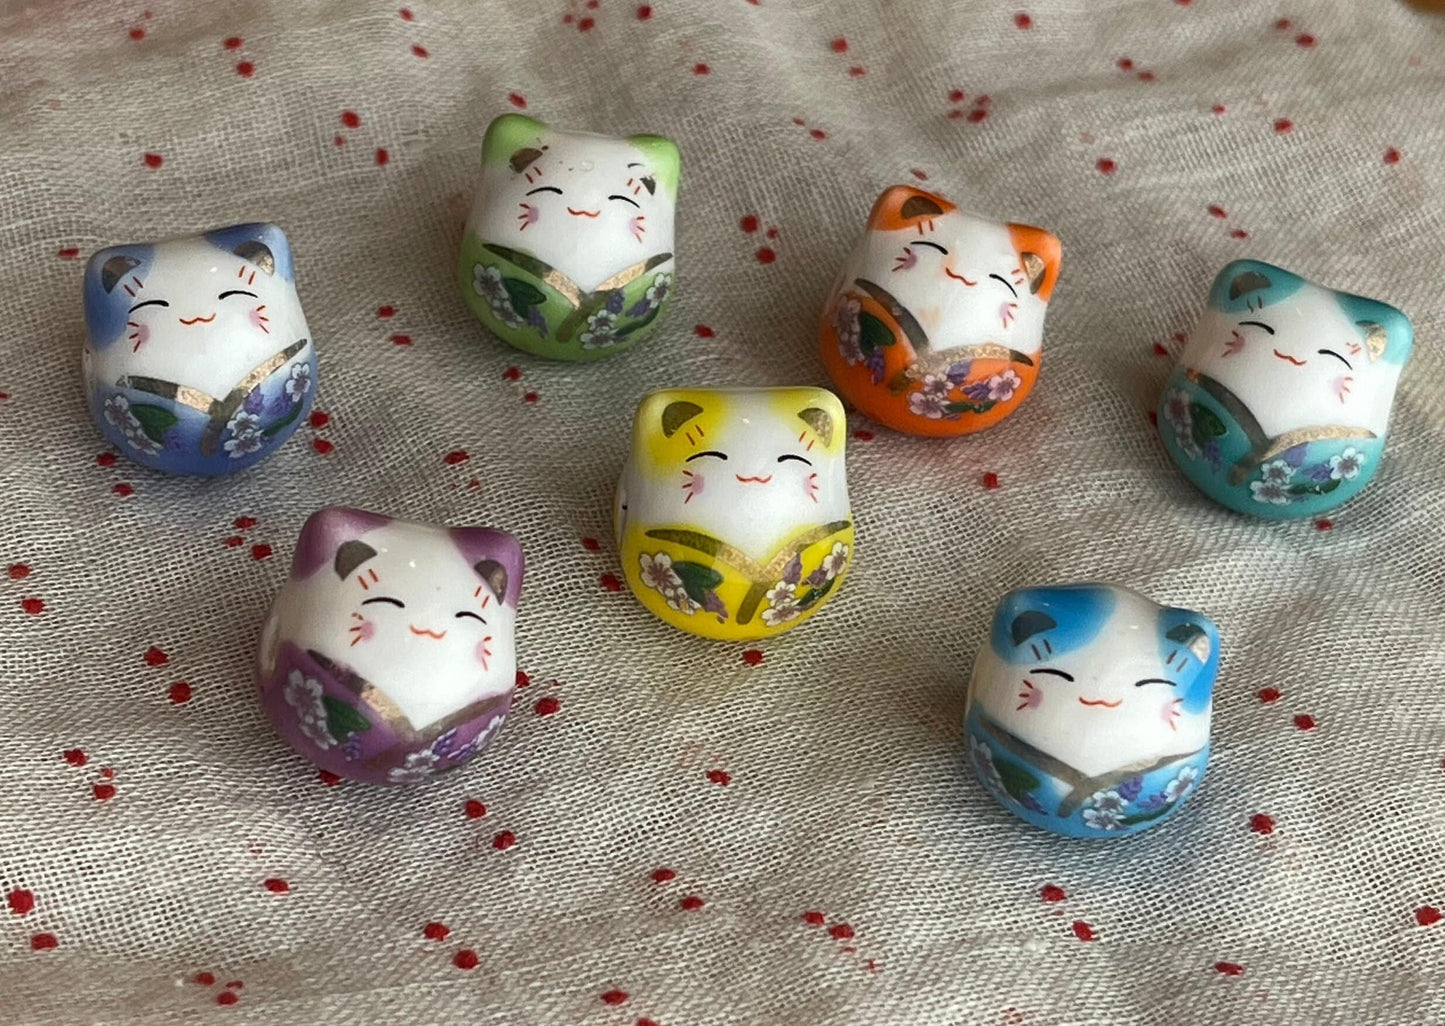 Cat With Flower Printed Porcelain Beads - handmade-single color lot of 4 or multicolor set of 7-blue, green, teal, orange, purple, yellow